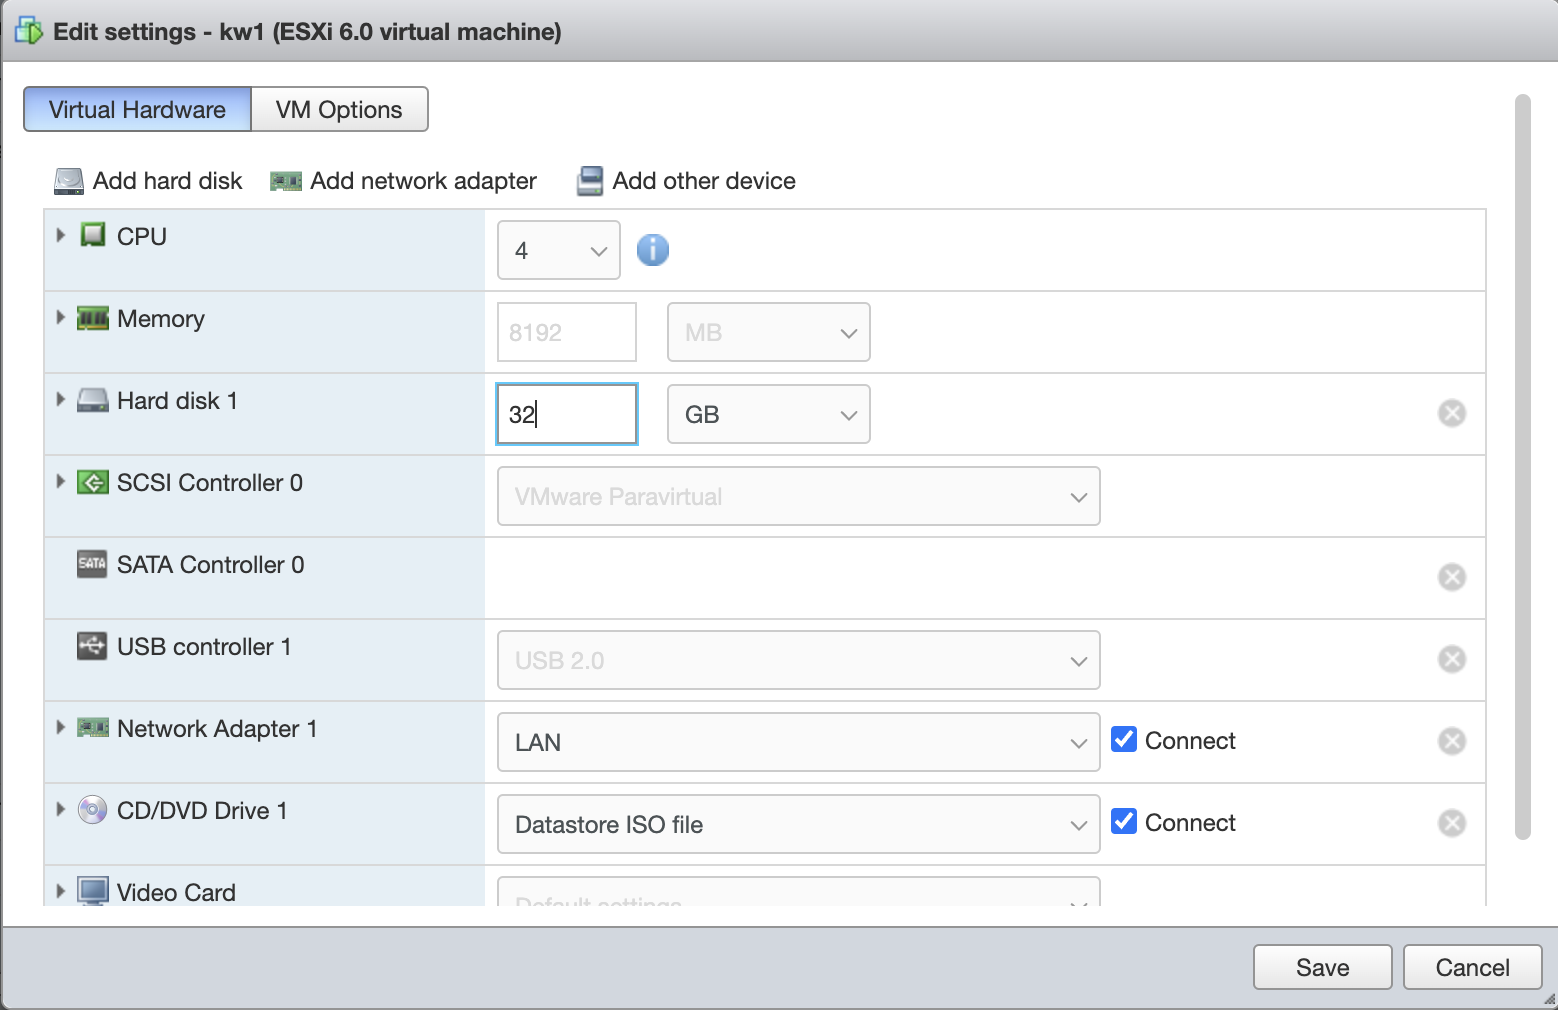 Resizing a disk in ESXi